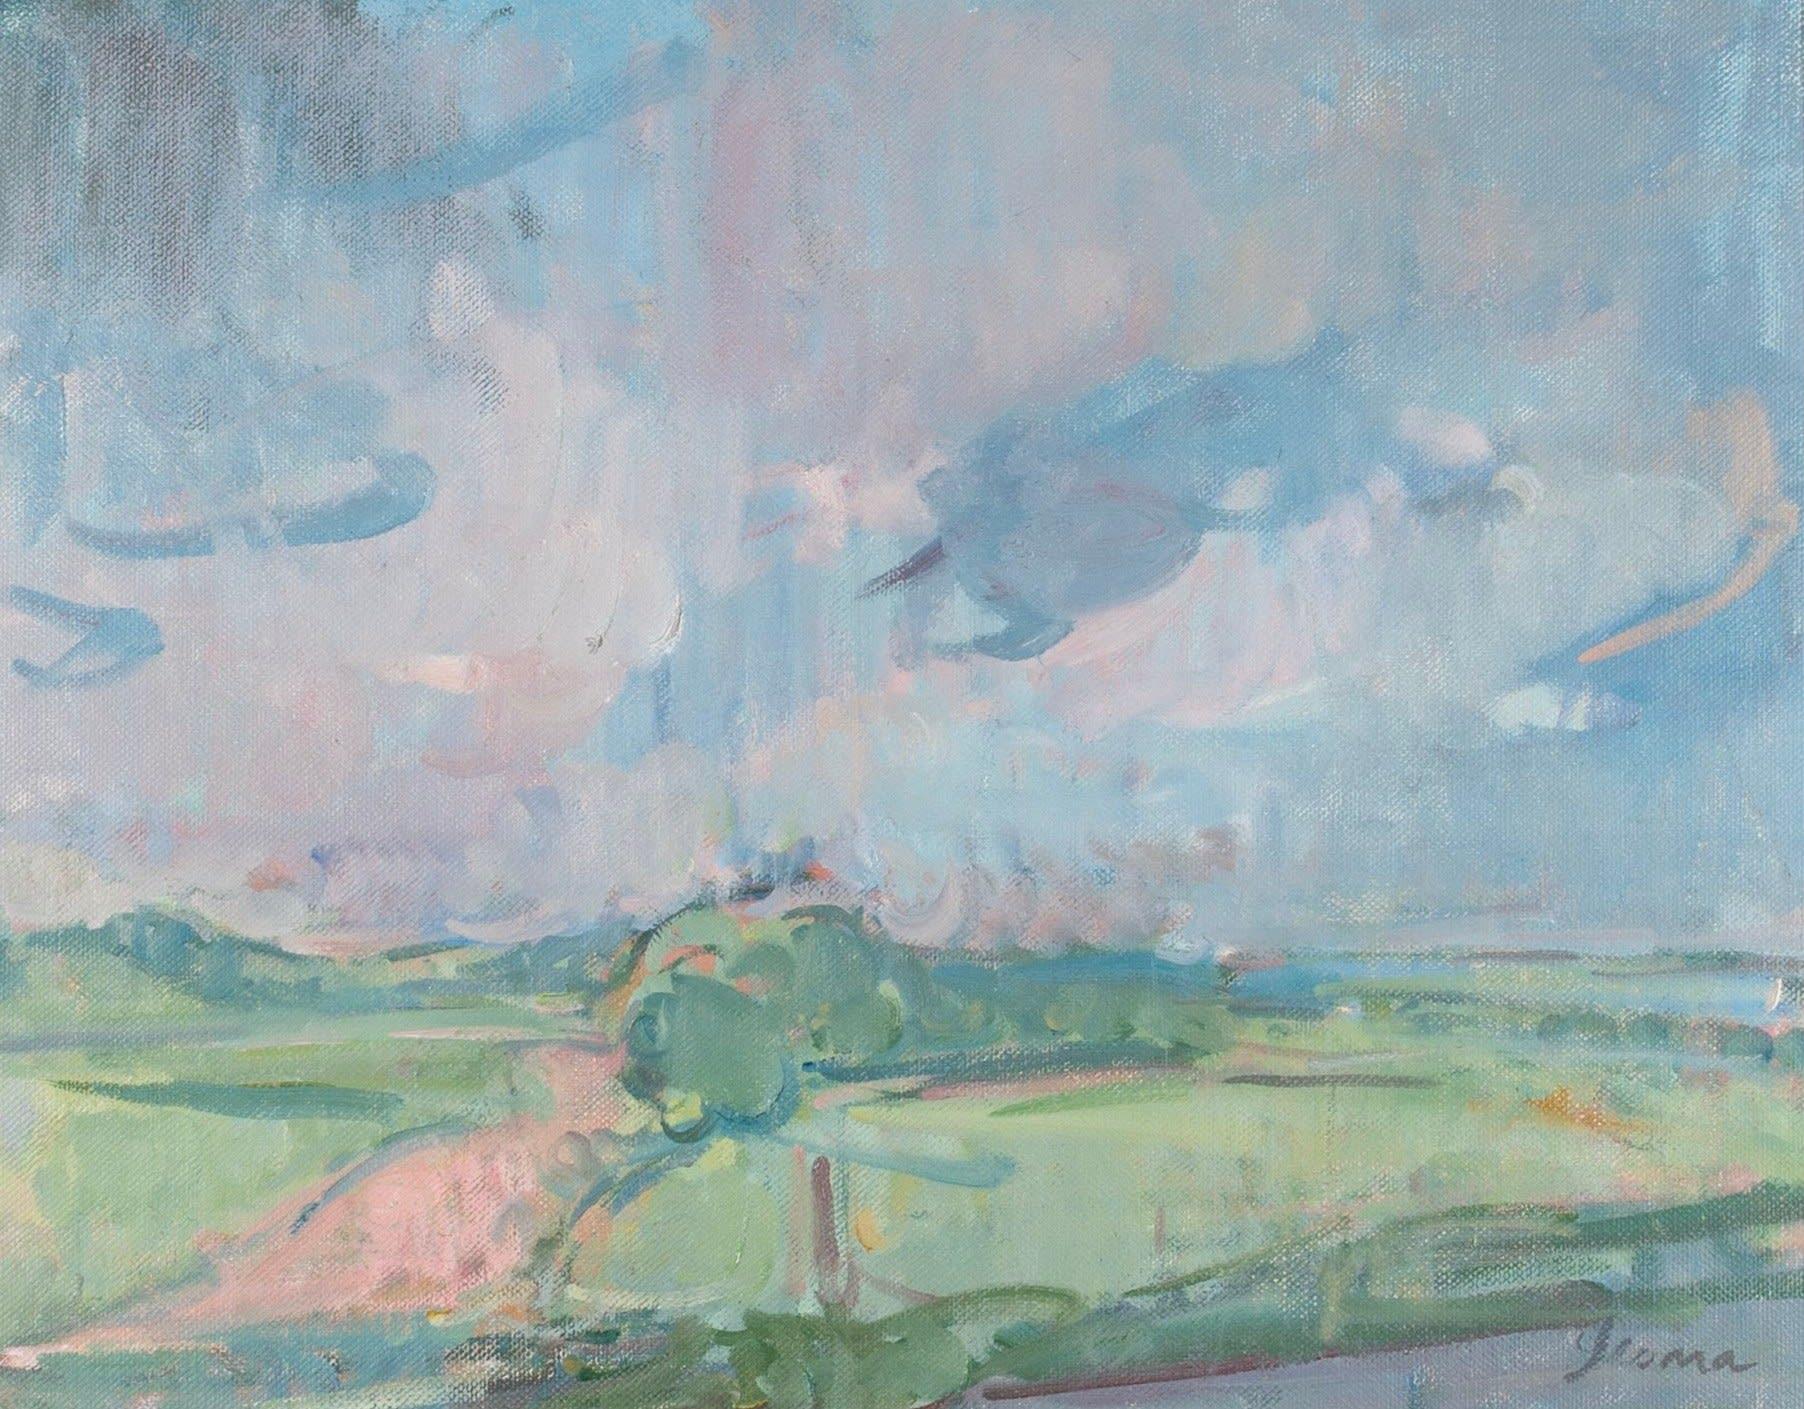 Salisbury Plain, Late Spring, Oil on Panel Painting by Martin Yeoman B. 1953

Additional information:
Medium: Oil on panel
Dimensions: 55.9 x 71.1 cm
22 x 28 in

Martin Yeoman was born in 1953, and studied with Peter Greenham at the Royal Academy